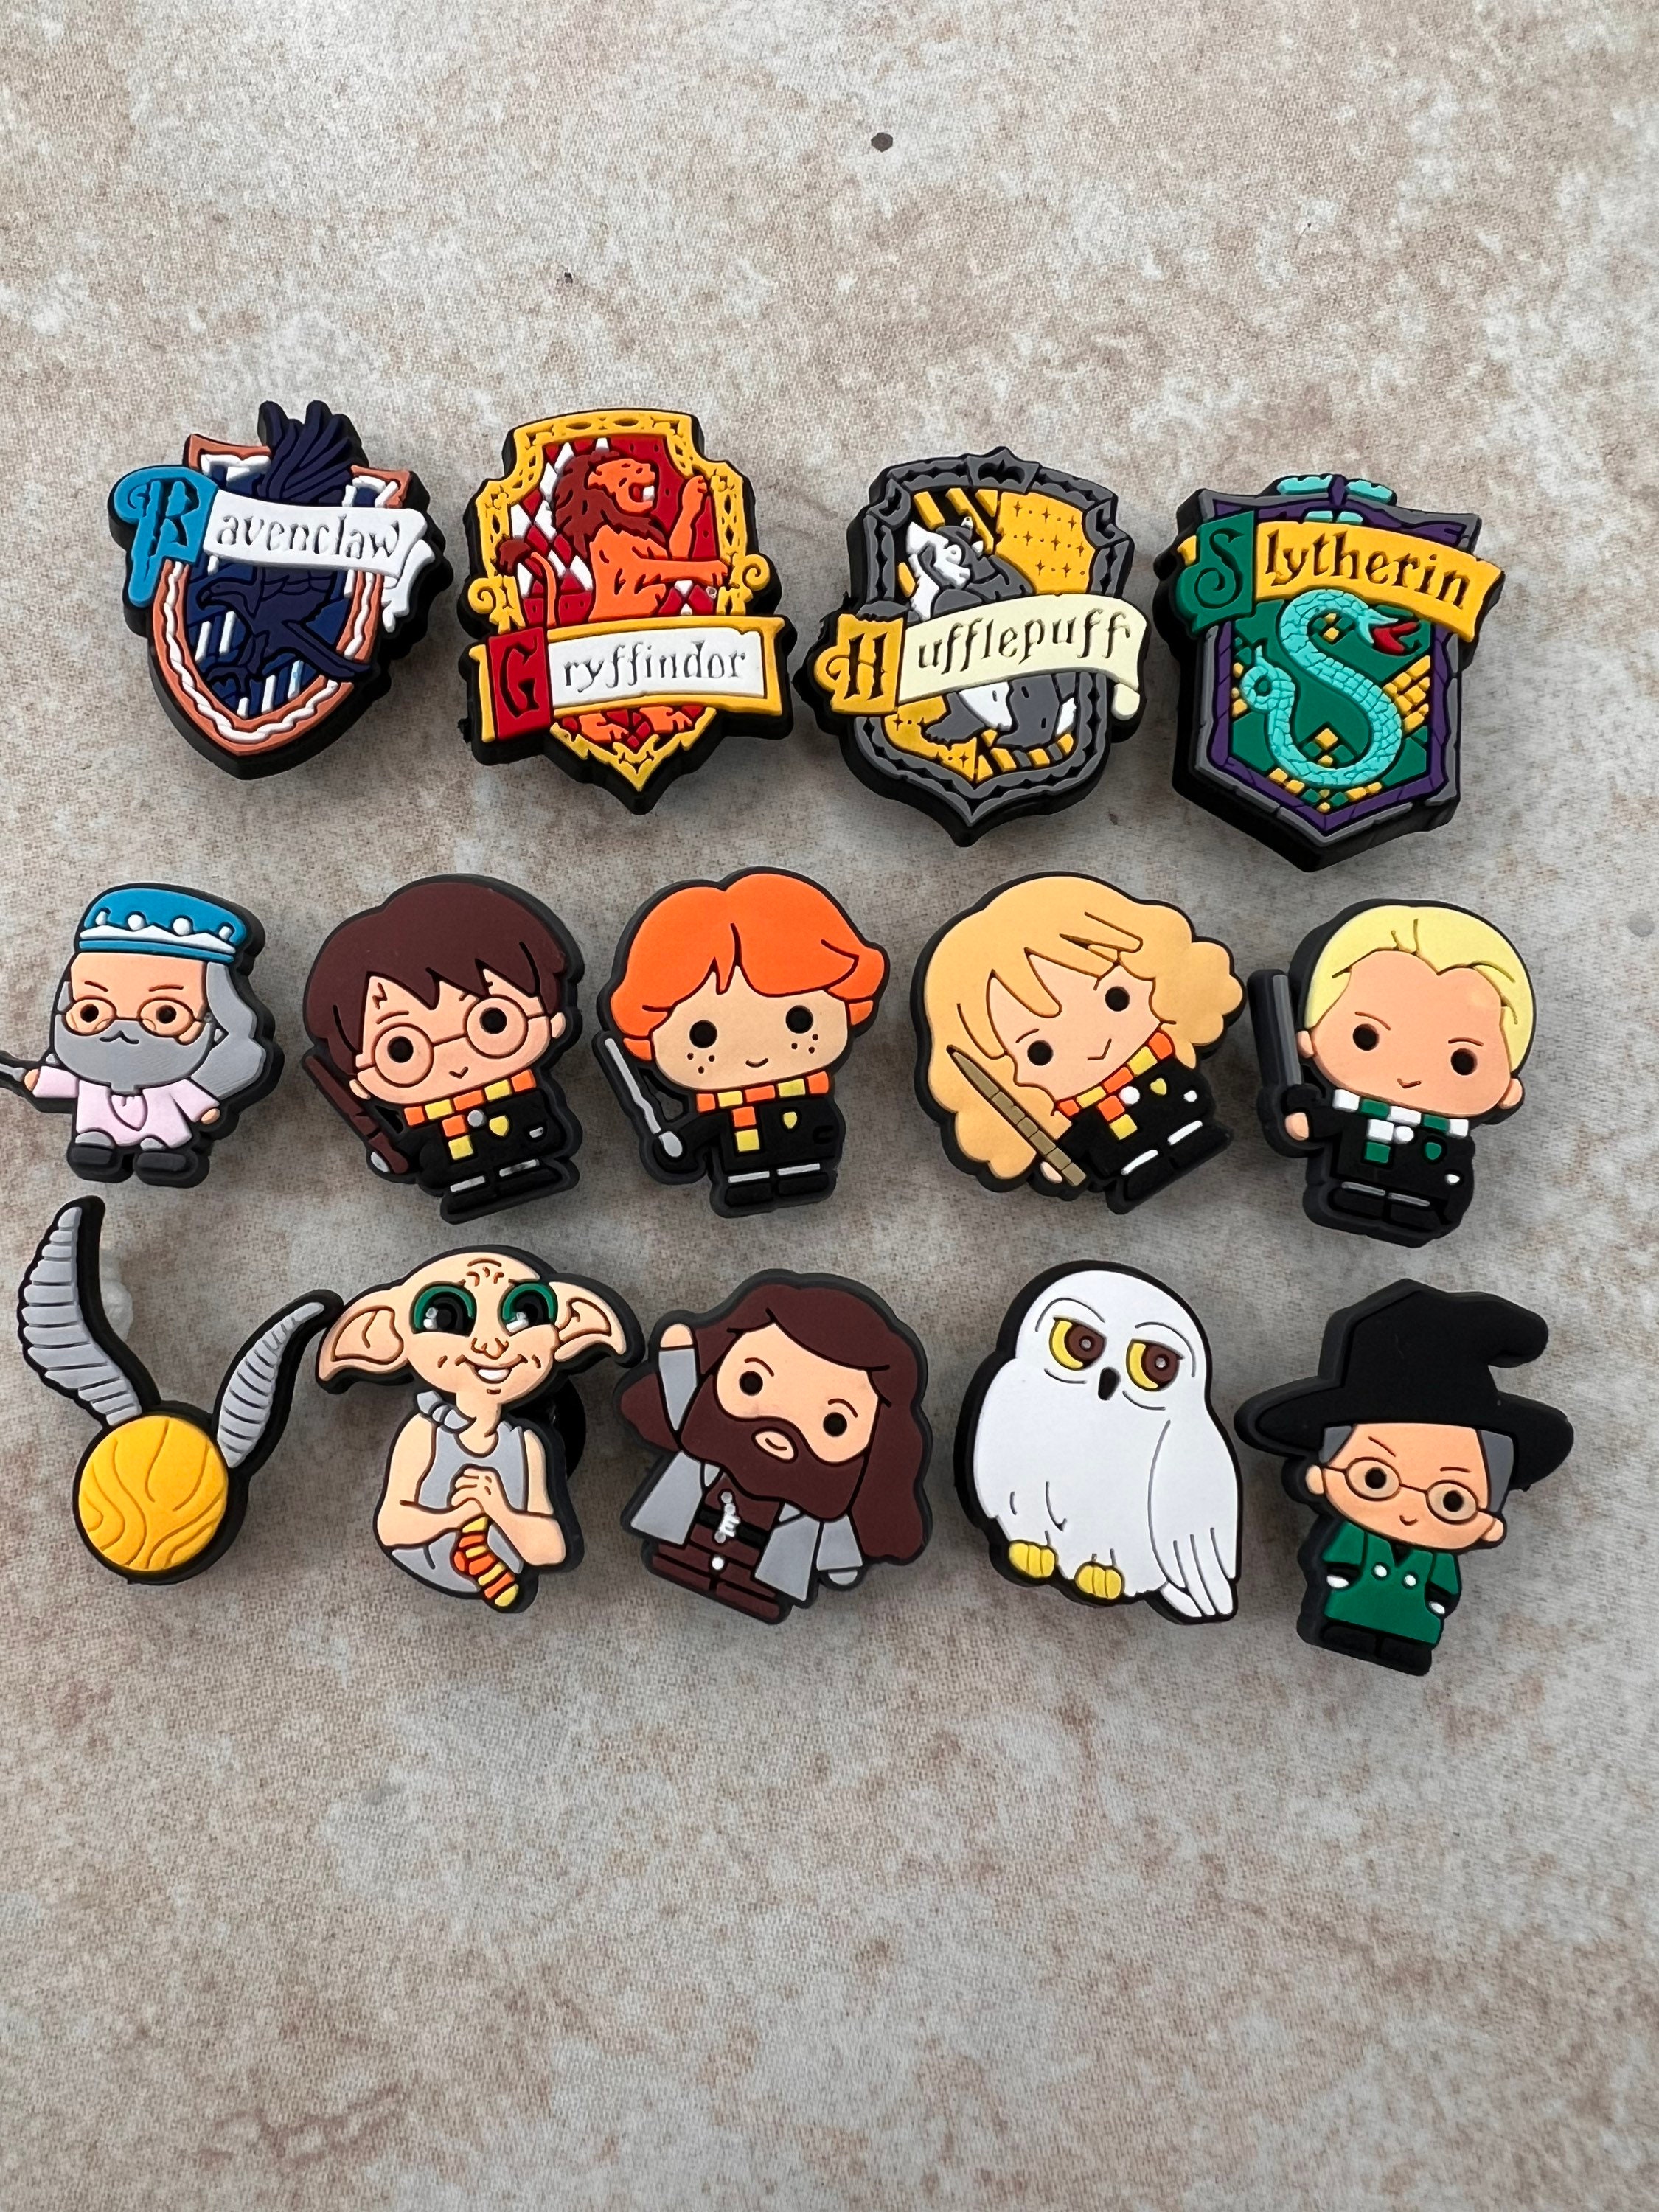 New Harry Potter straw charms available! #harrypotter #strawcharms